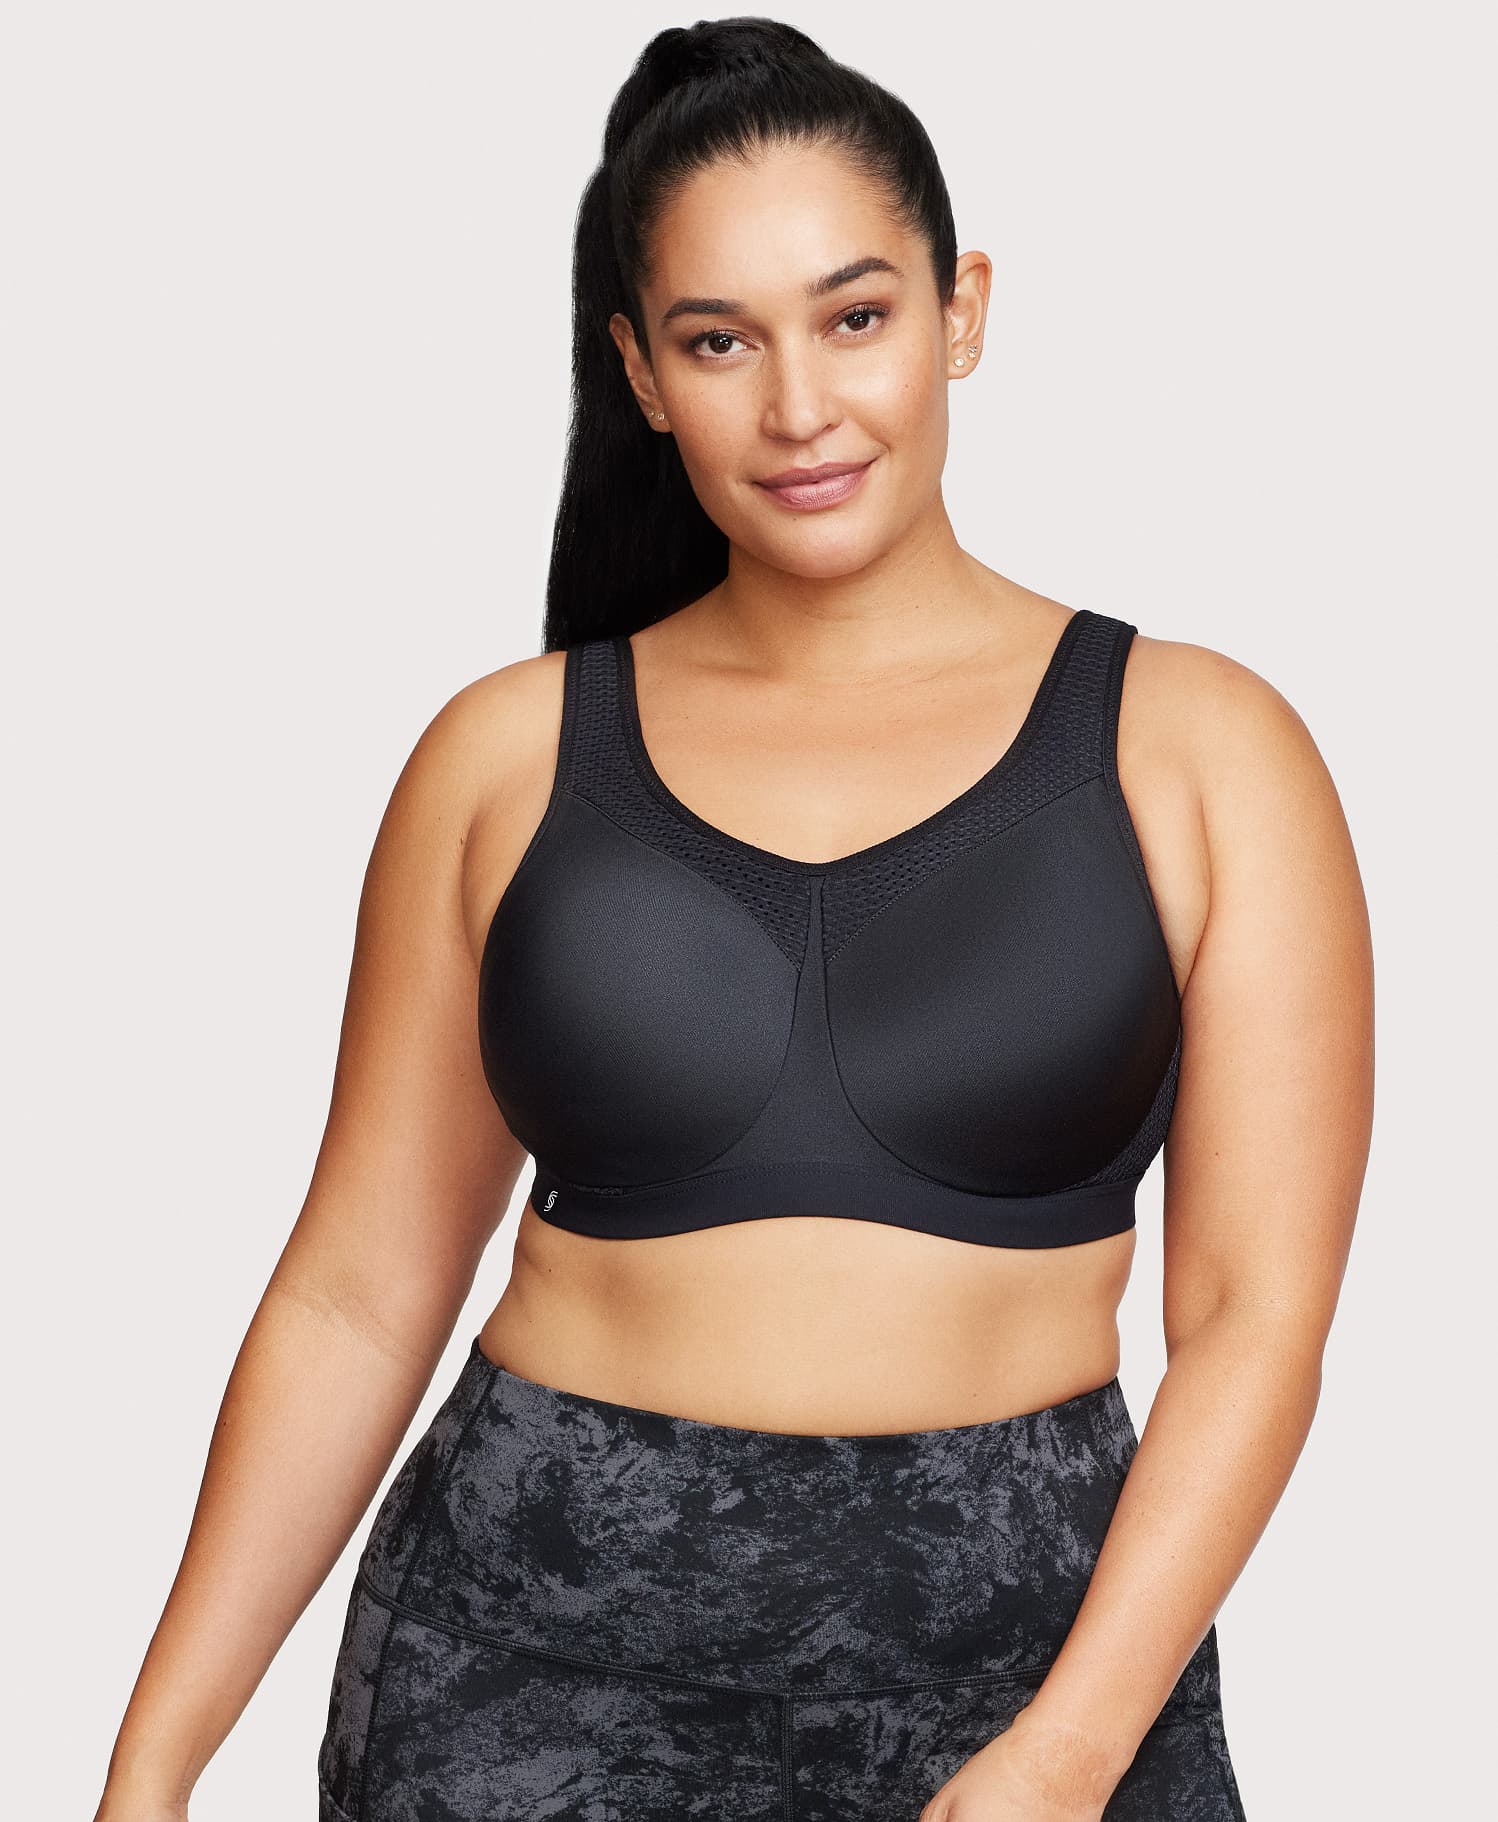 Women's sports bra, size 40D. Brand is Glamorise. Clean with no stains.